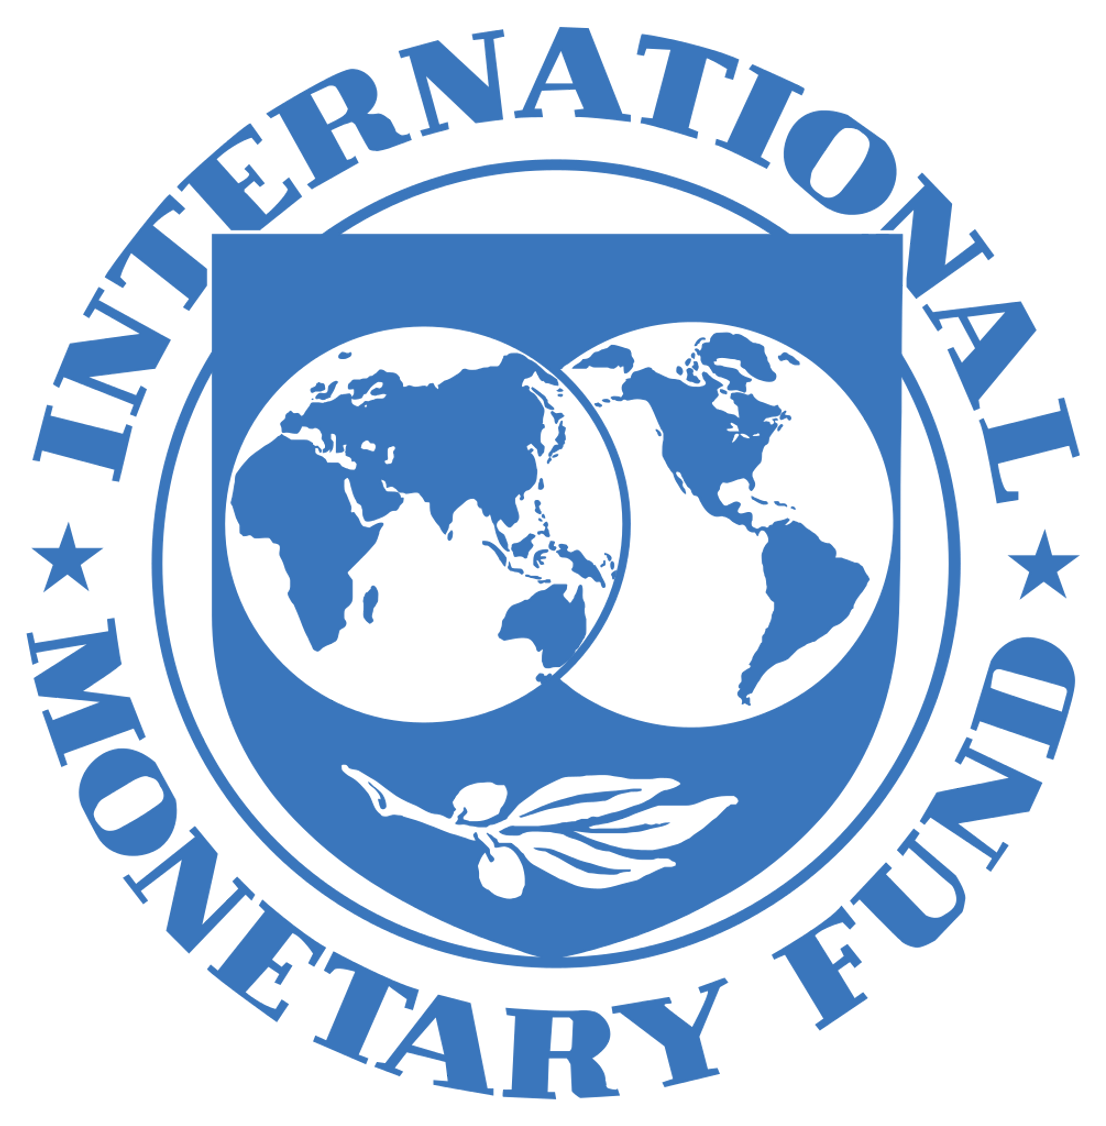 The International Monetary Fund is one of the prime organizations lending money to countries for various purposes.